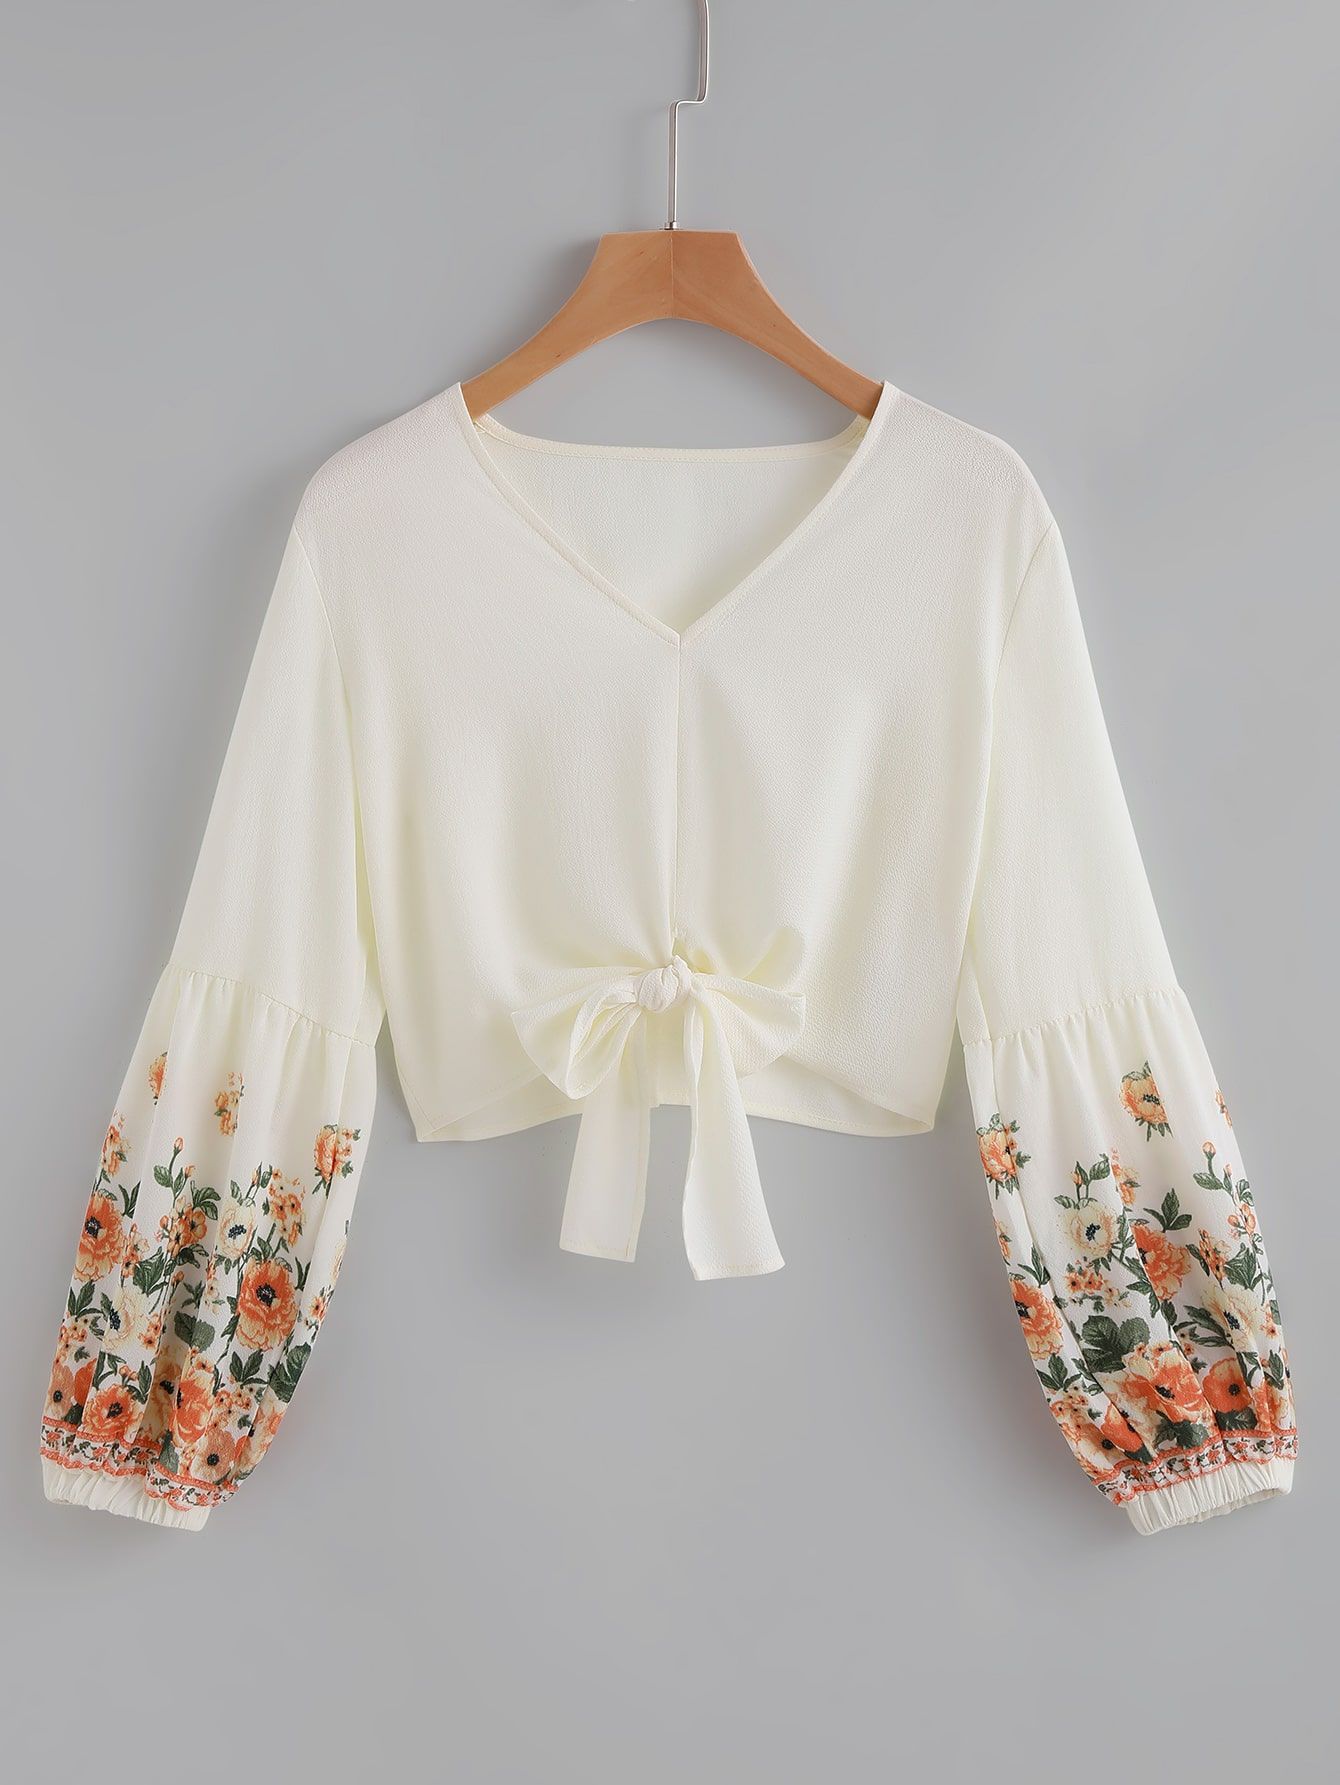 Floral Fantasy: Shine Bright in Floral Tops